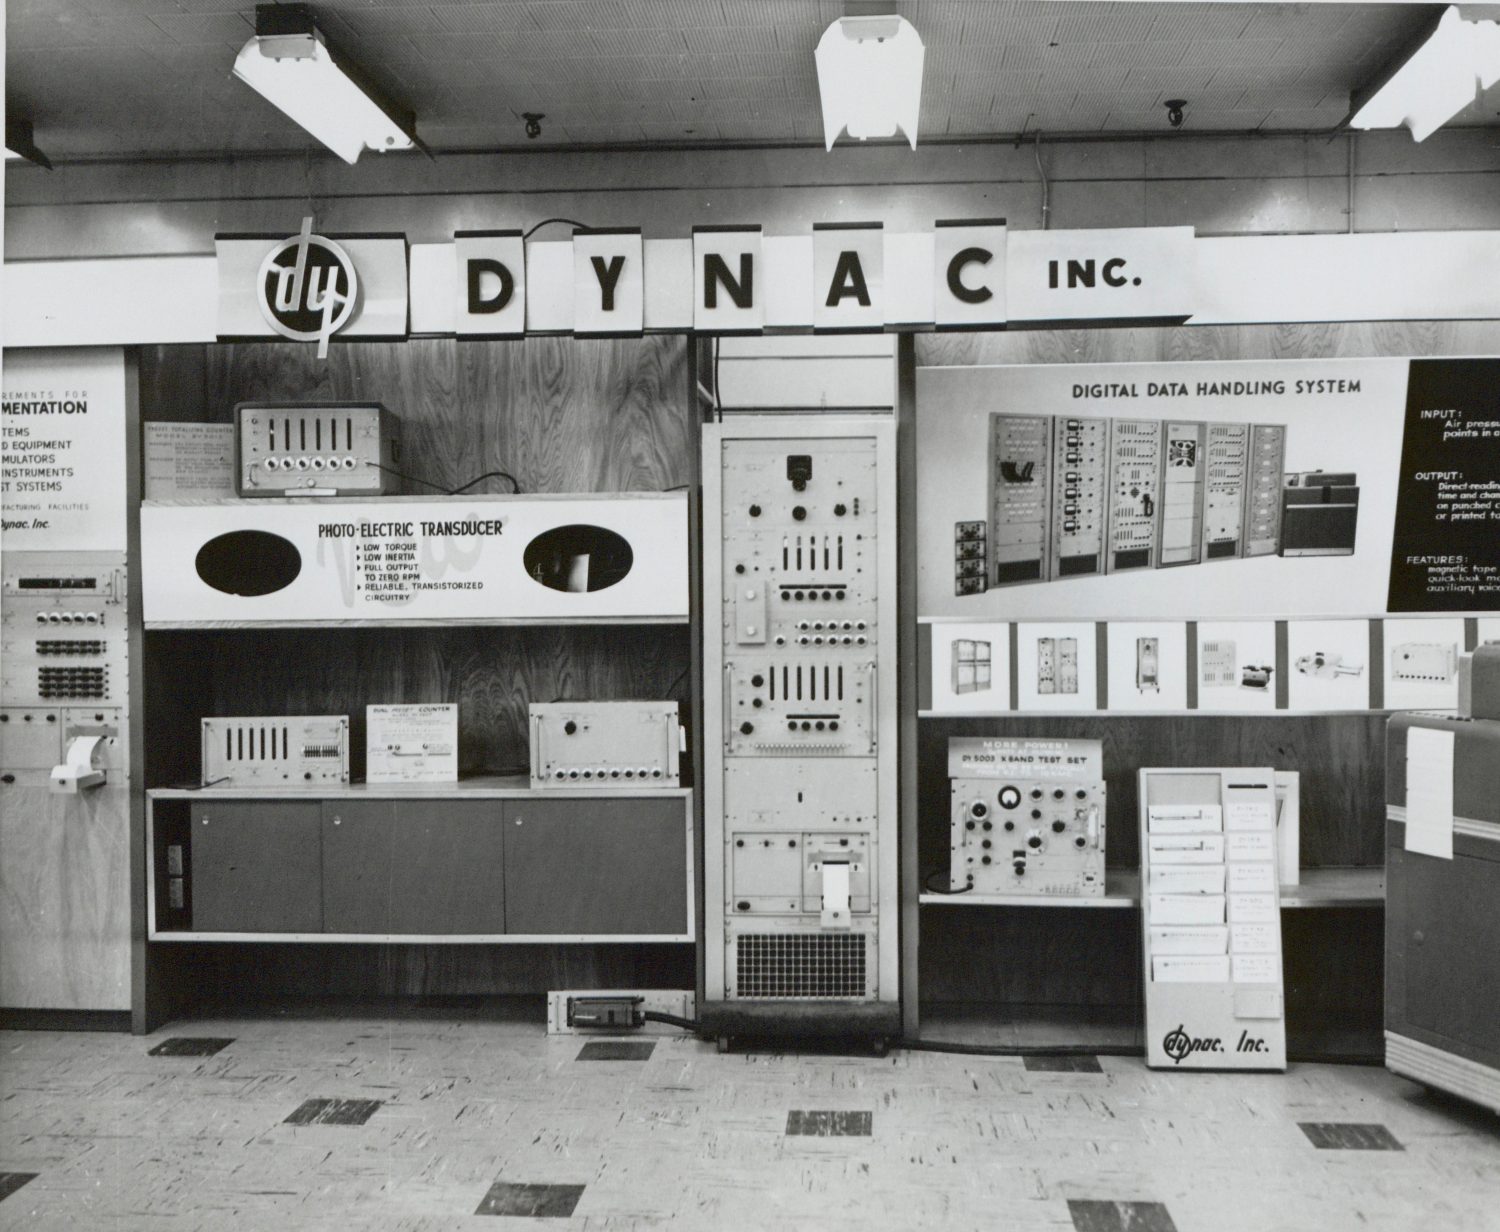 Photo of a Dynac display featuring the lowercase hp logo turned upside down (becoming dy).